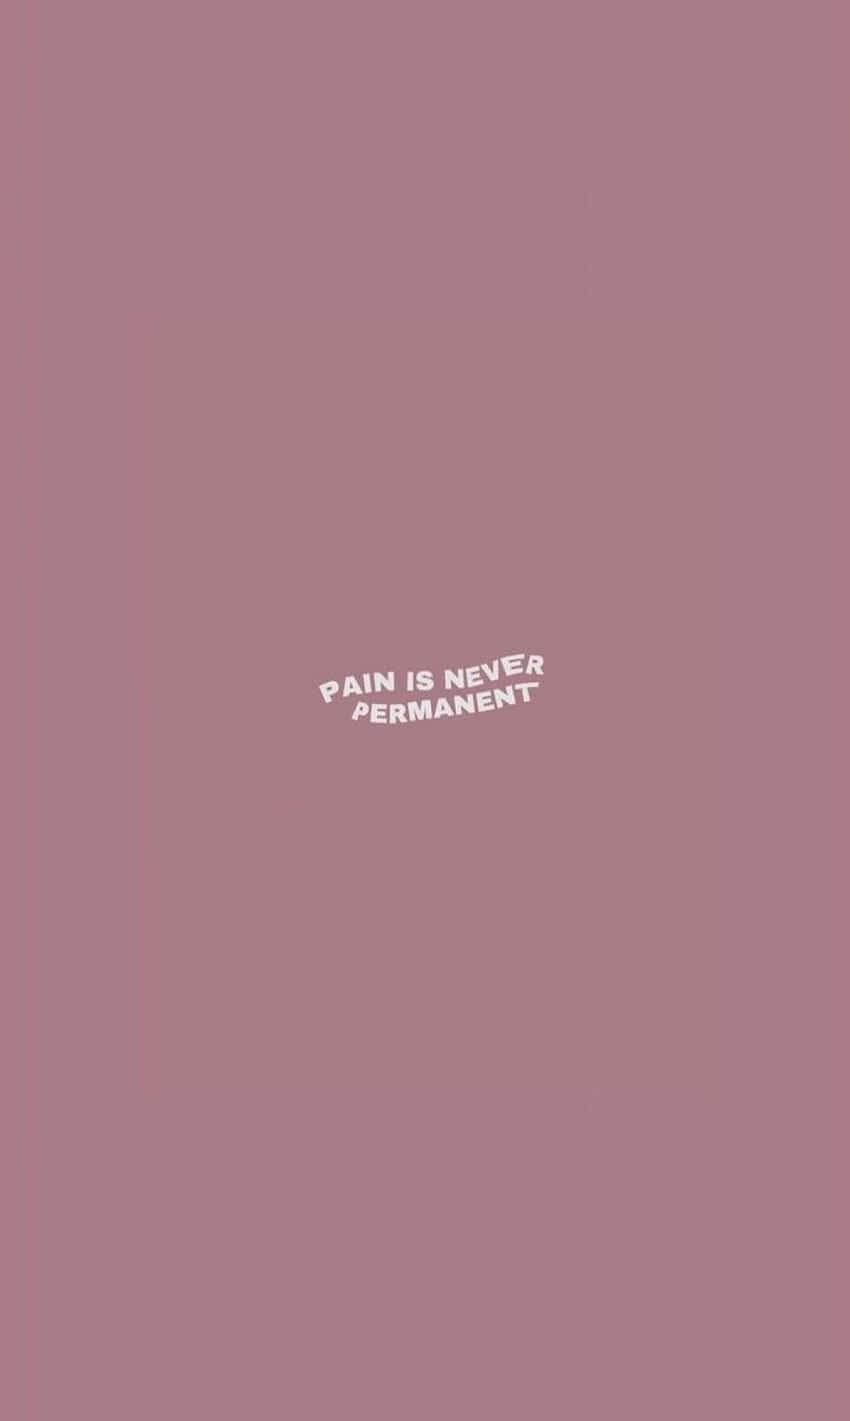 Quotes Tumblr Pink Pain